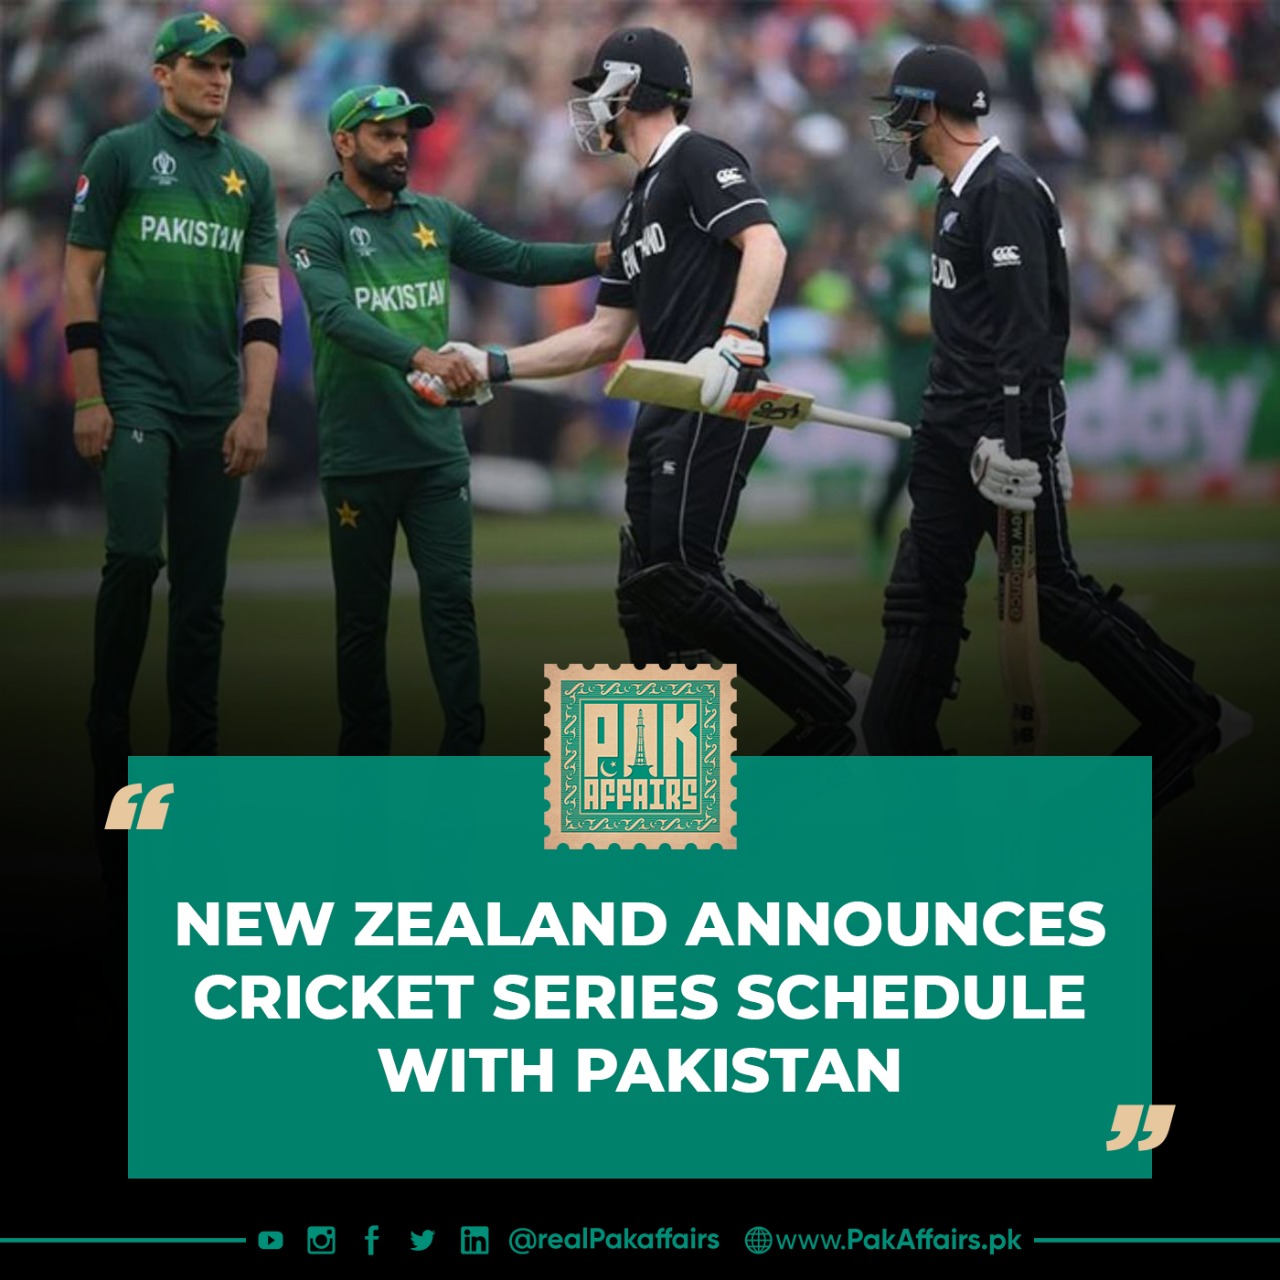 New Zealand announces Cricket series schedule with Pakistan